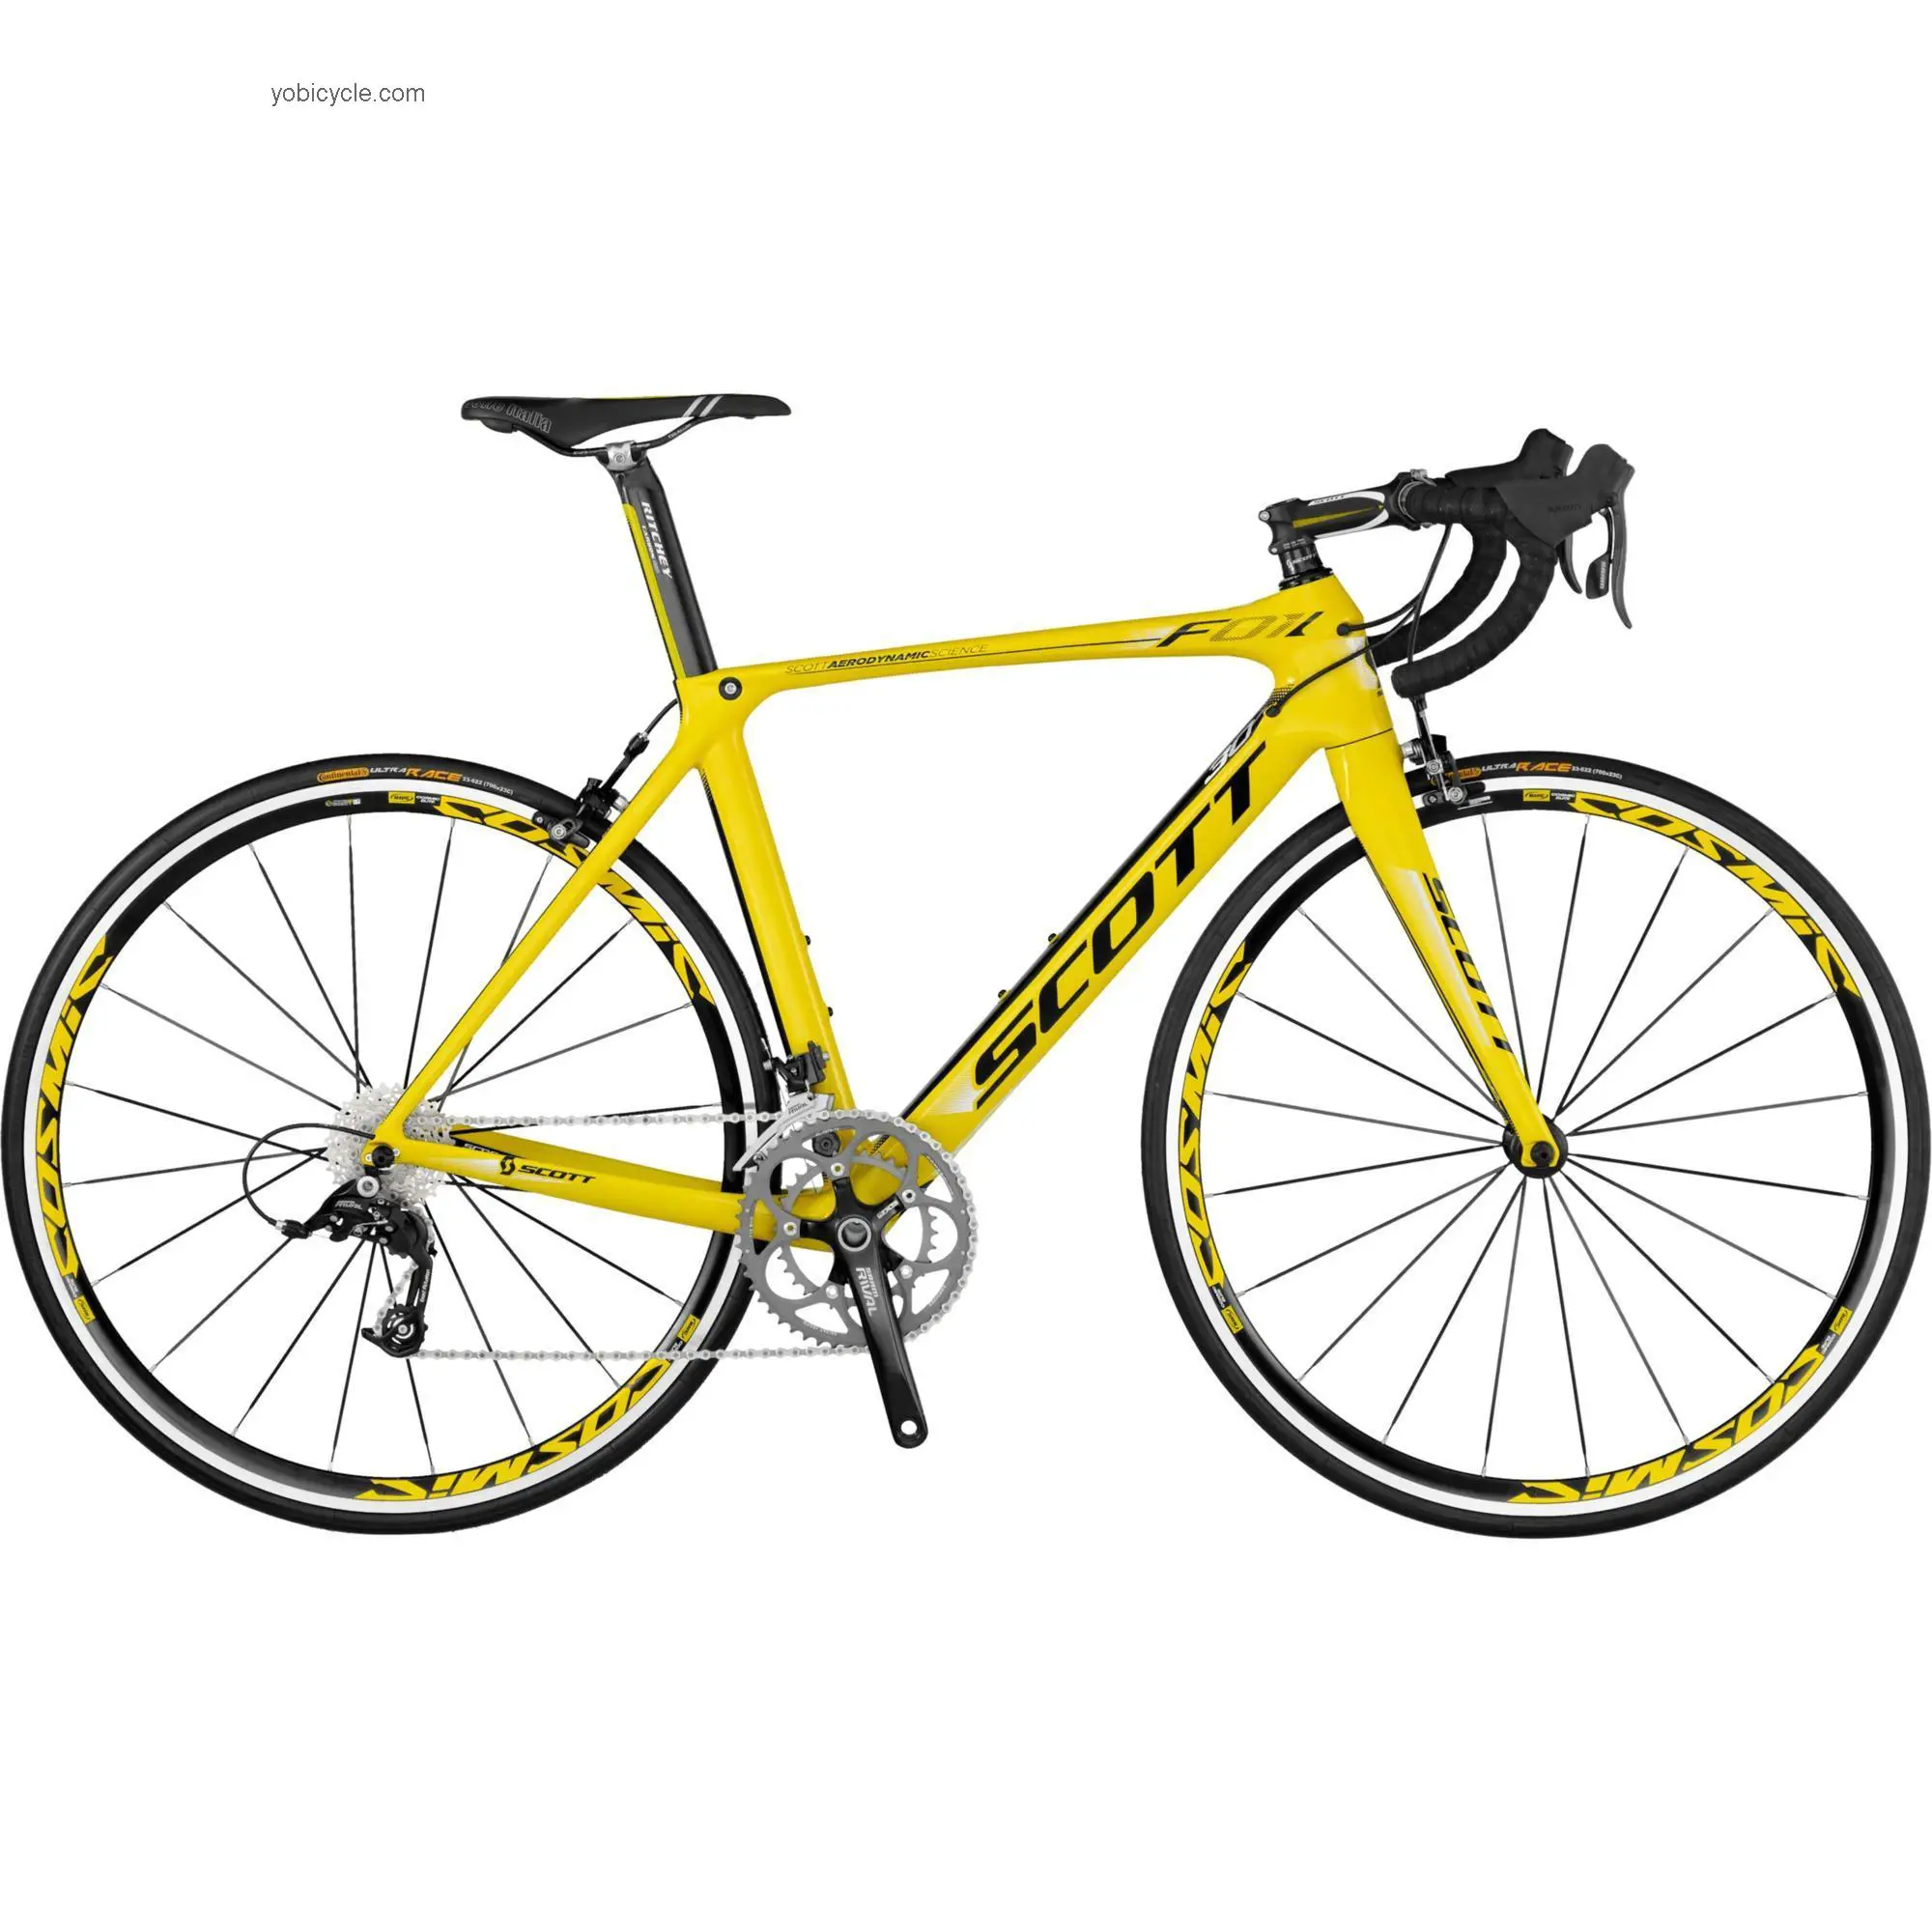 Scott  Foil 30 Technical data and specifications